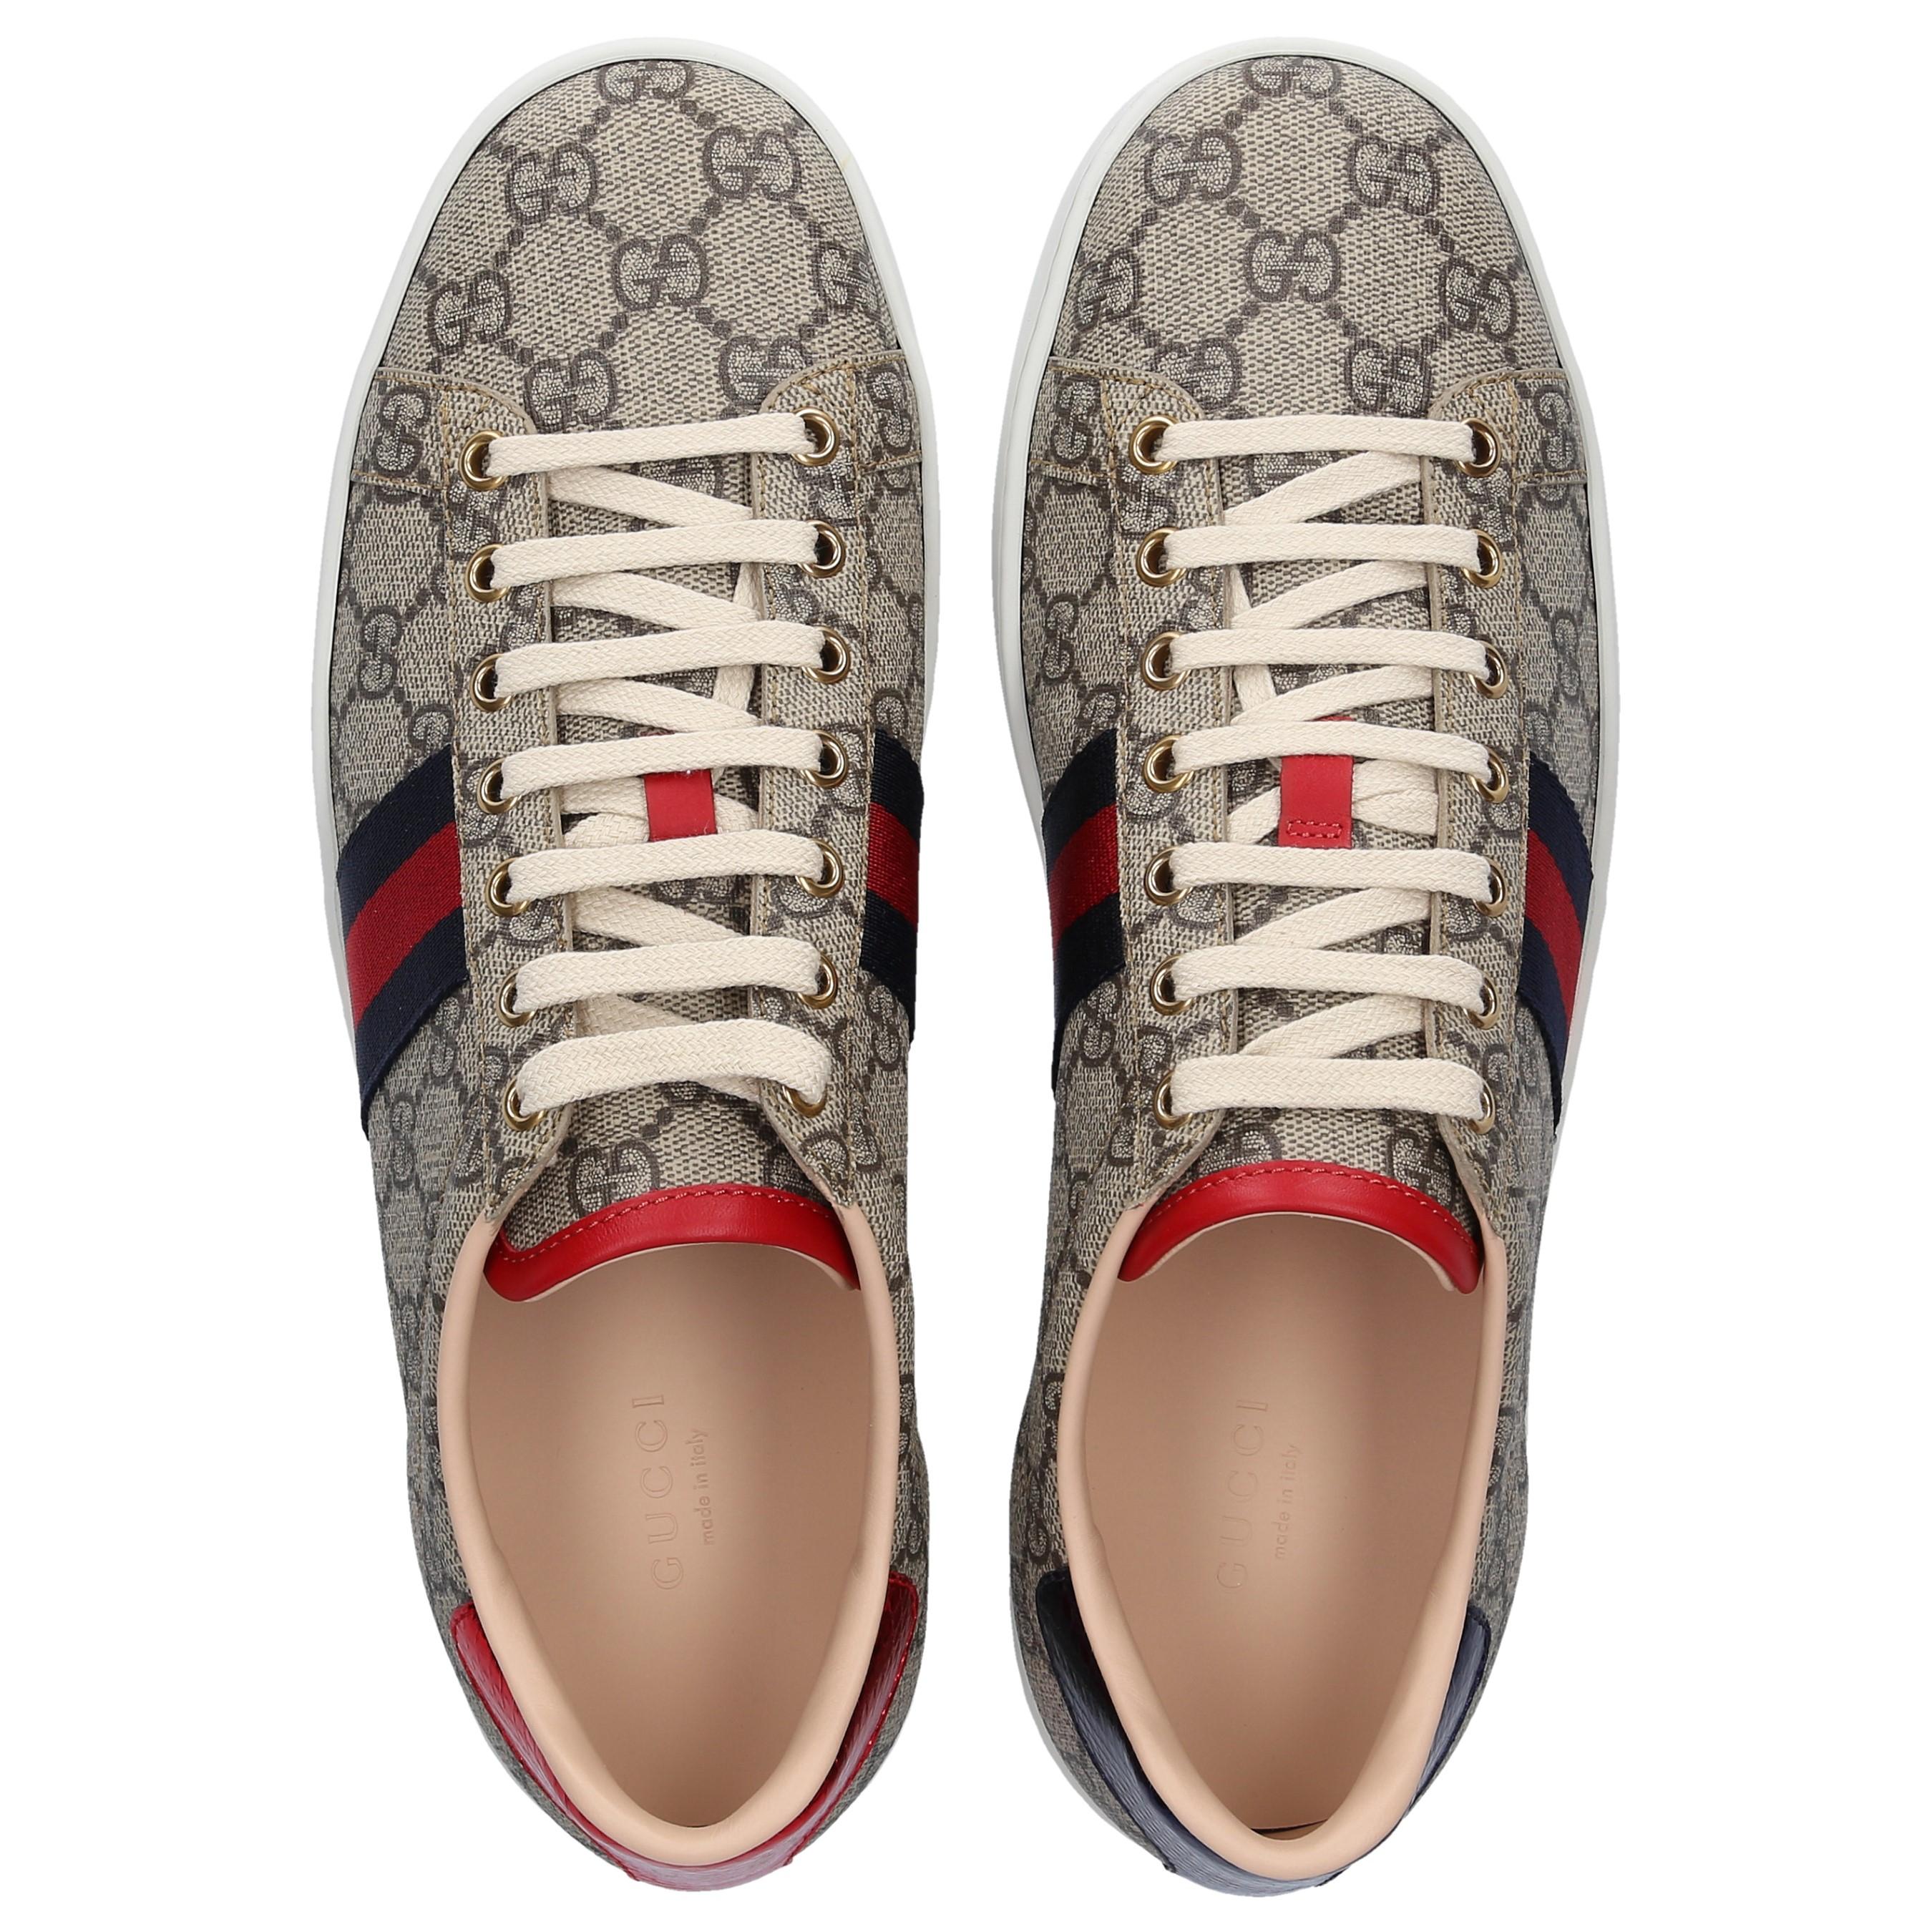 Gucci Gg Canvas New Ace Sneakes in Beige (Natural) - Save 45% | Lyst